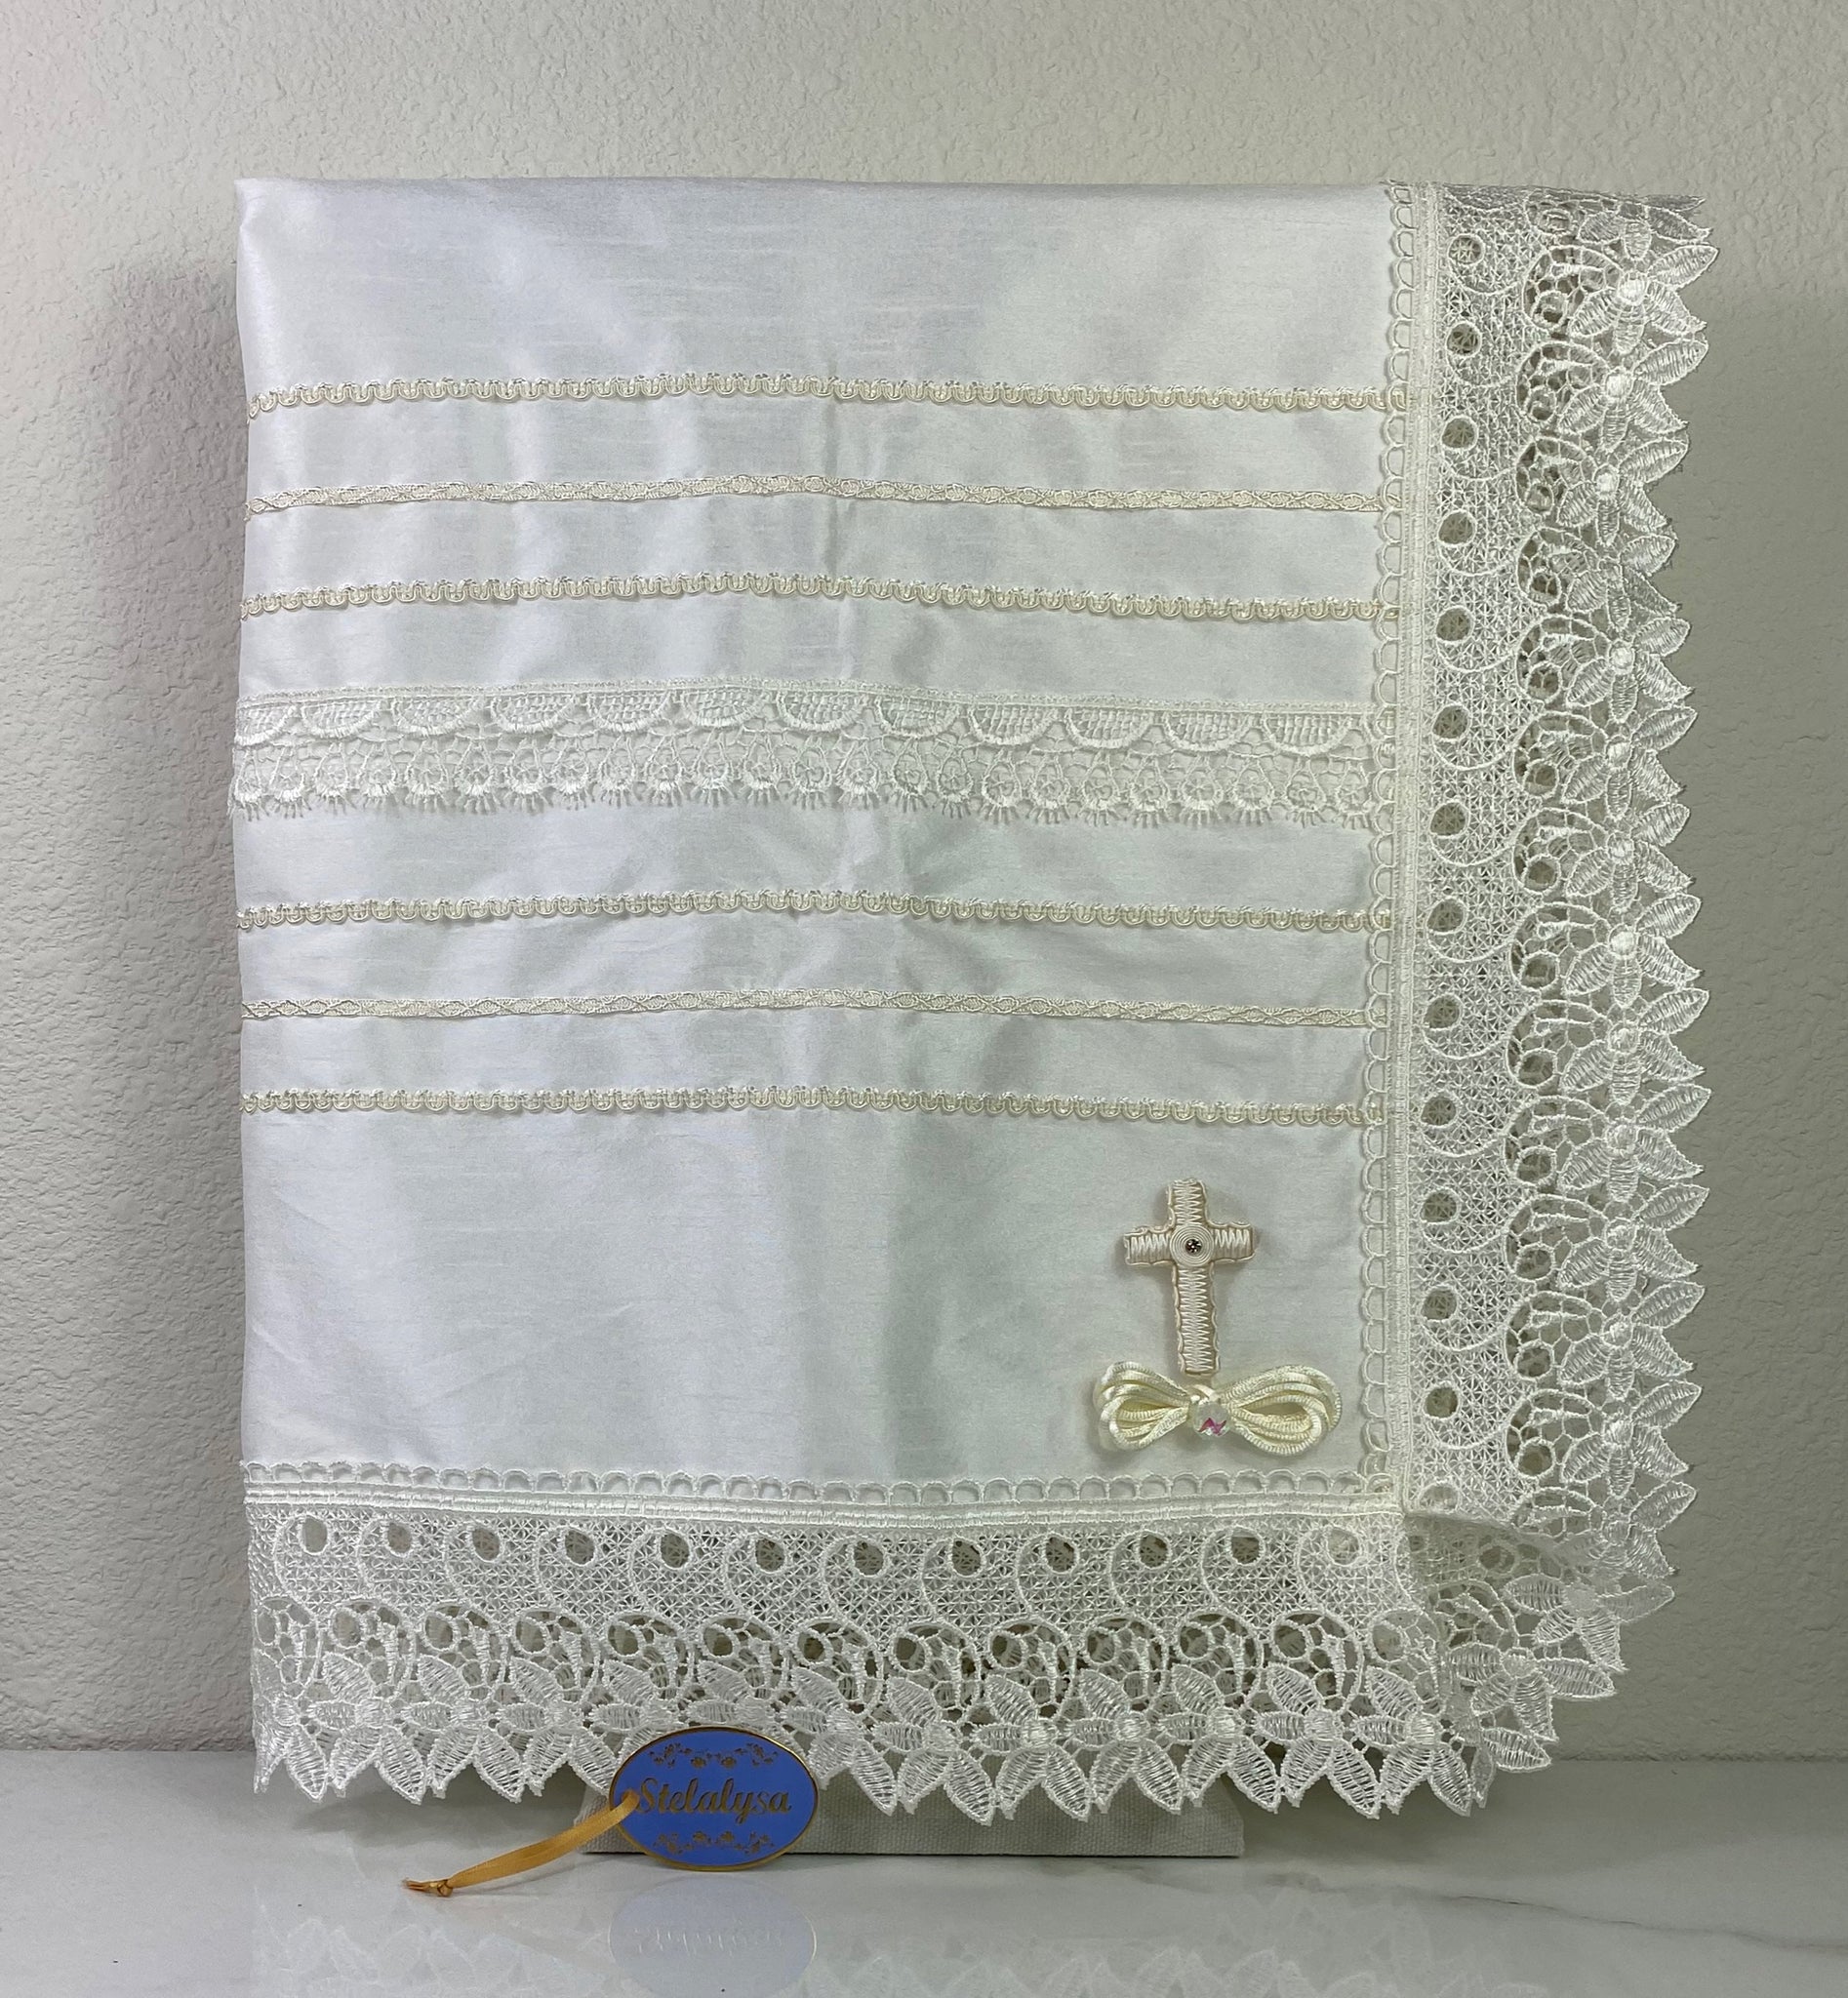 Beautiful ivory silk baptism blanket with an embroidered cross, elegant lace edge, bow, and jewels.